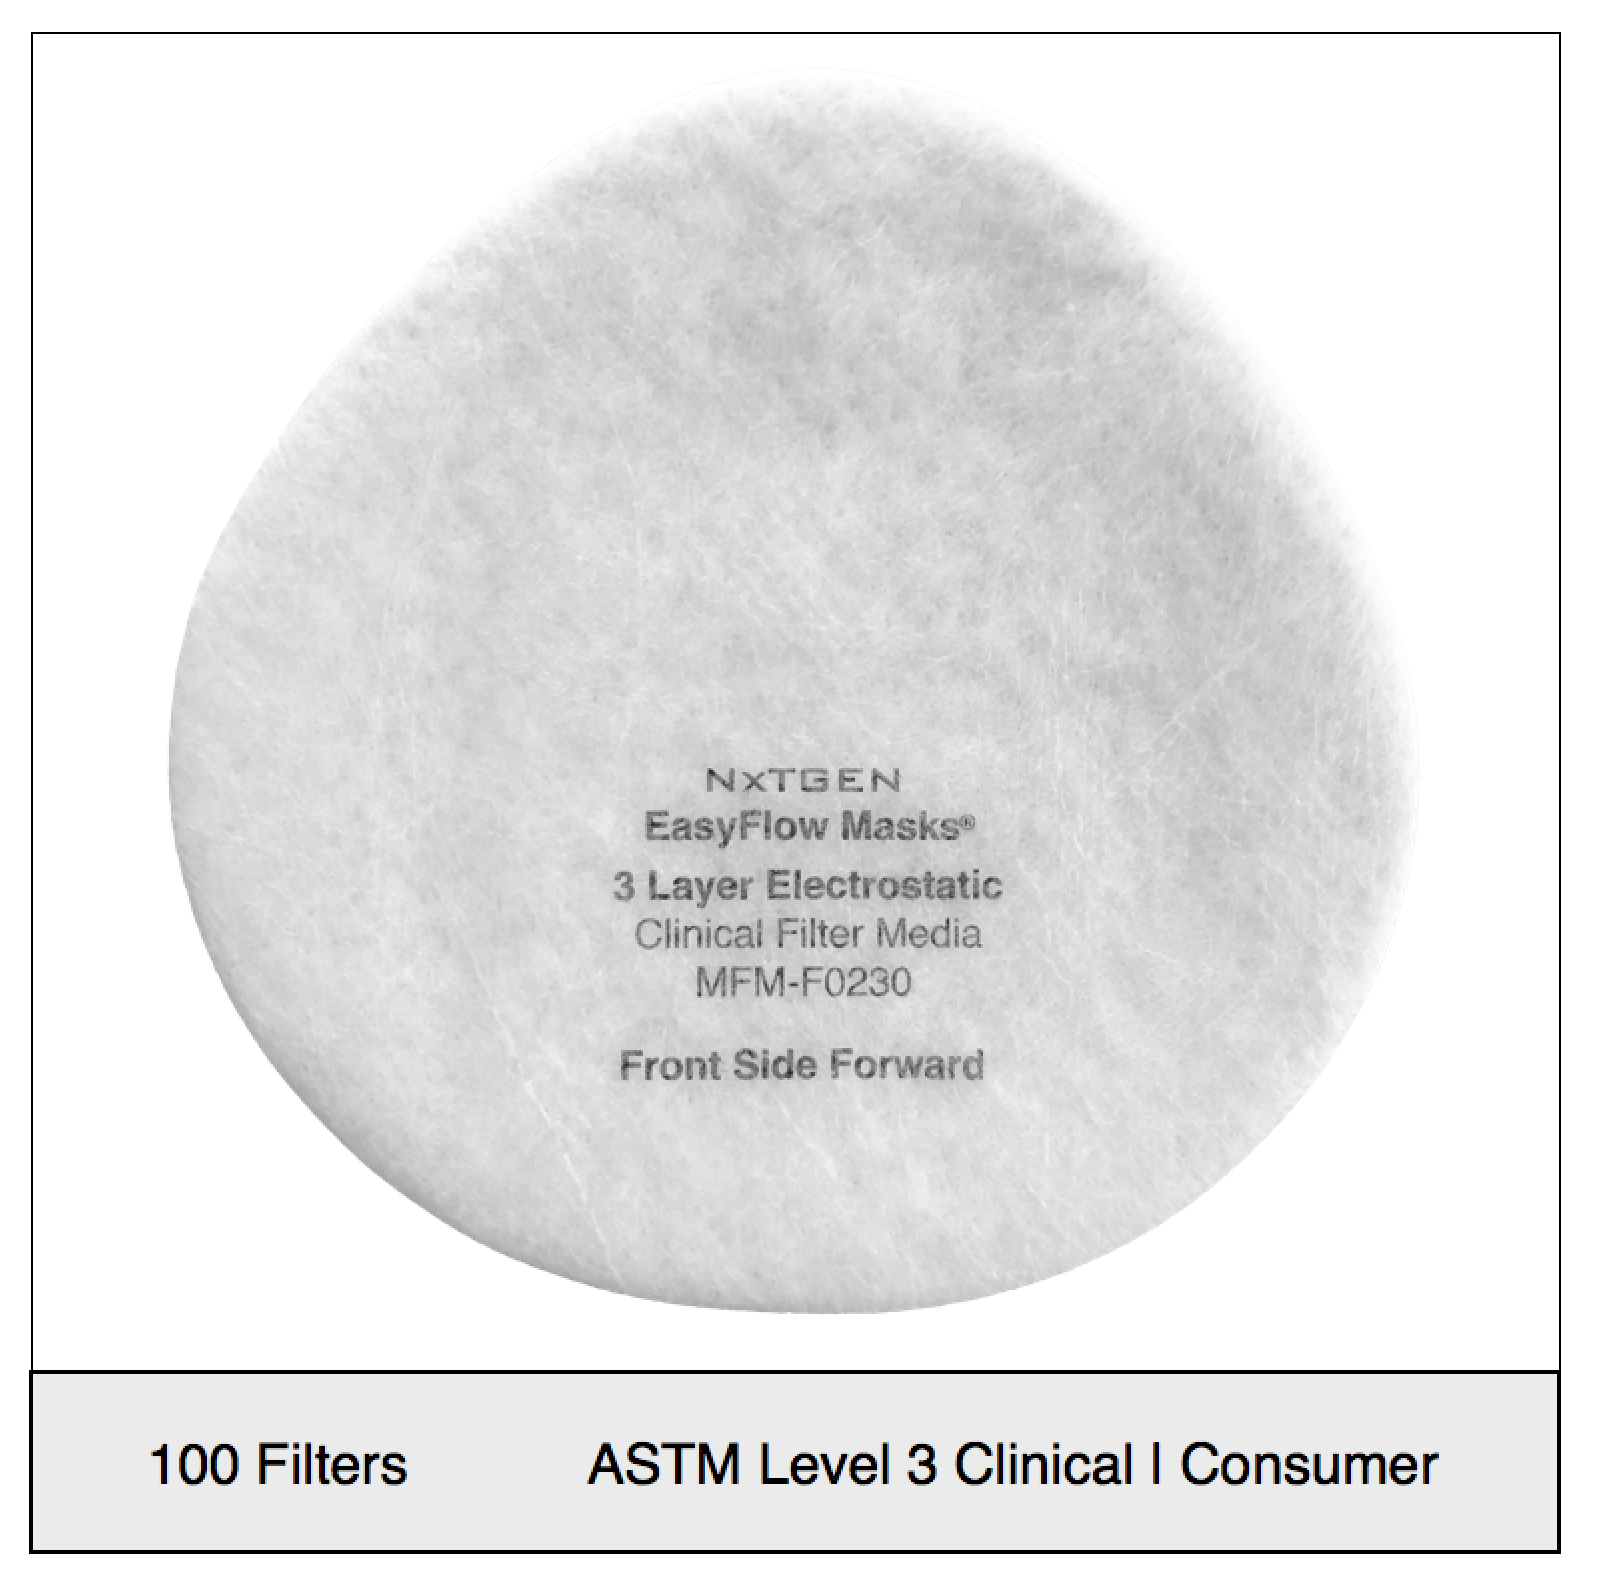 ASTM Level 3 Clinical | Consumer filter Set (100 qty)